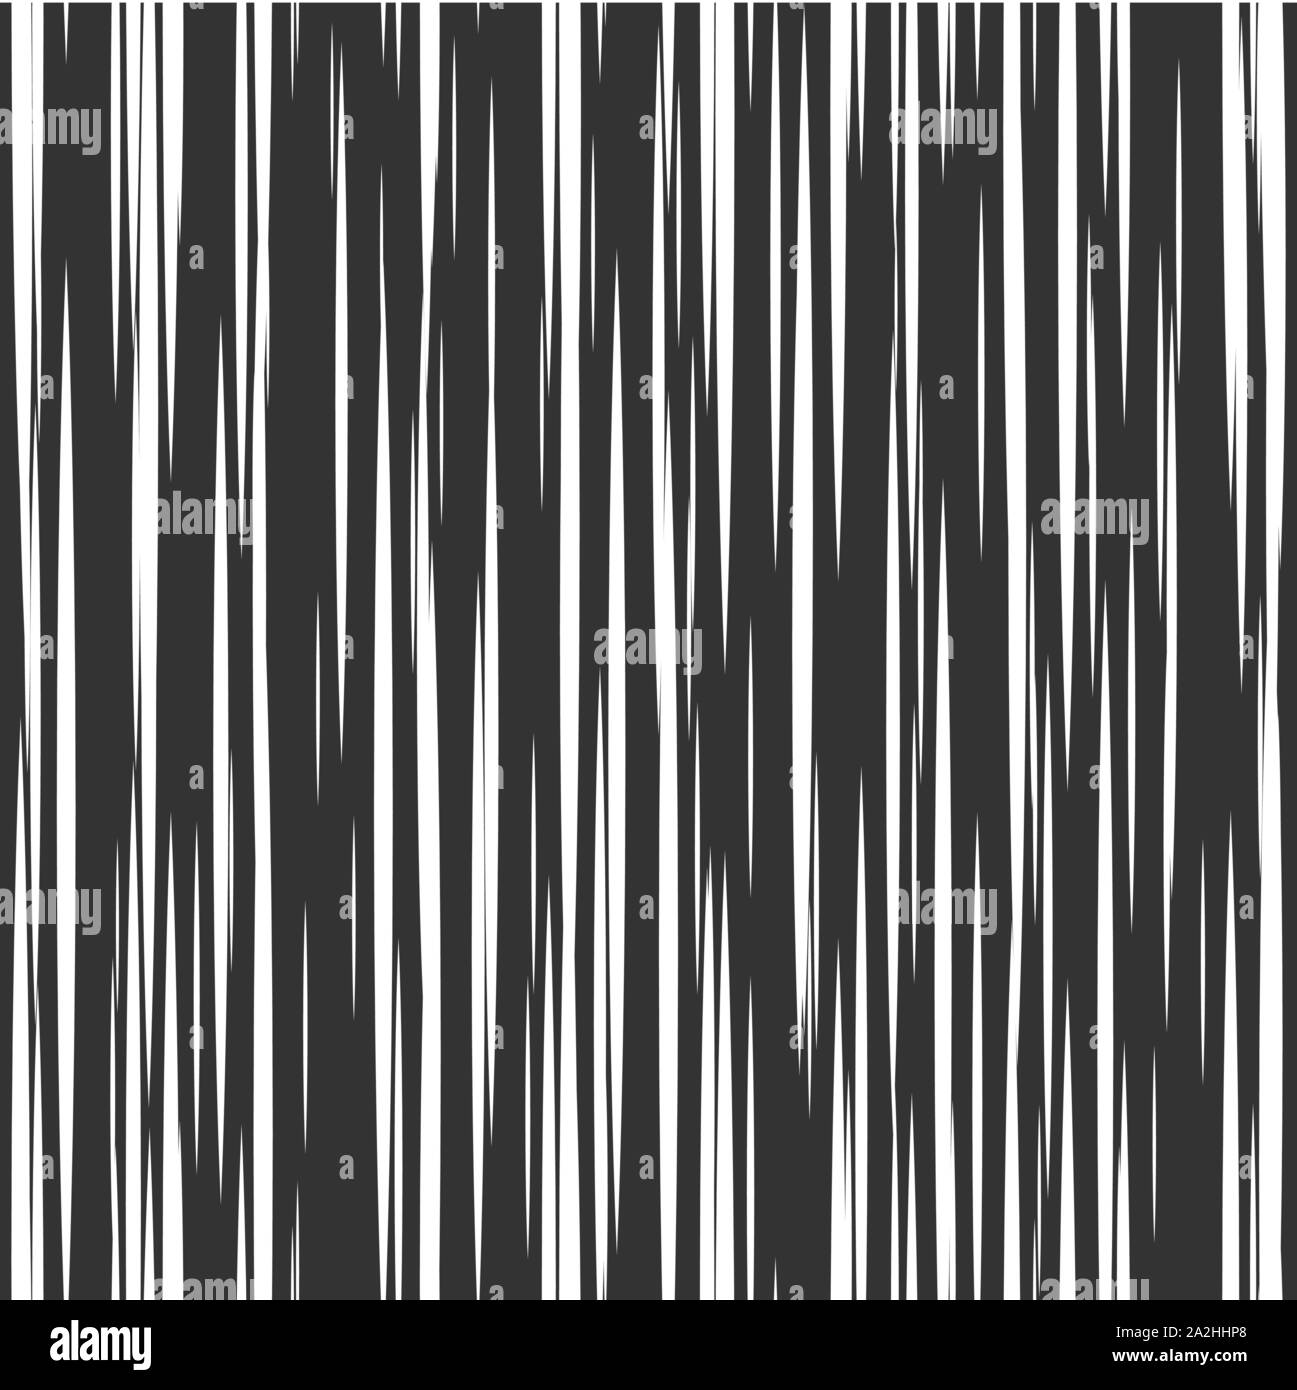 Striped seamless pattern with vertical line. Black and white fashion graphics design. Strict graphic background. Retro style. Template for wallpaper, wrapping, textile, fabric. Vector Illustration. Stock Vector